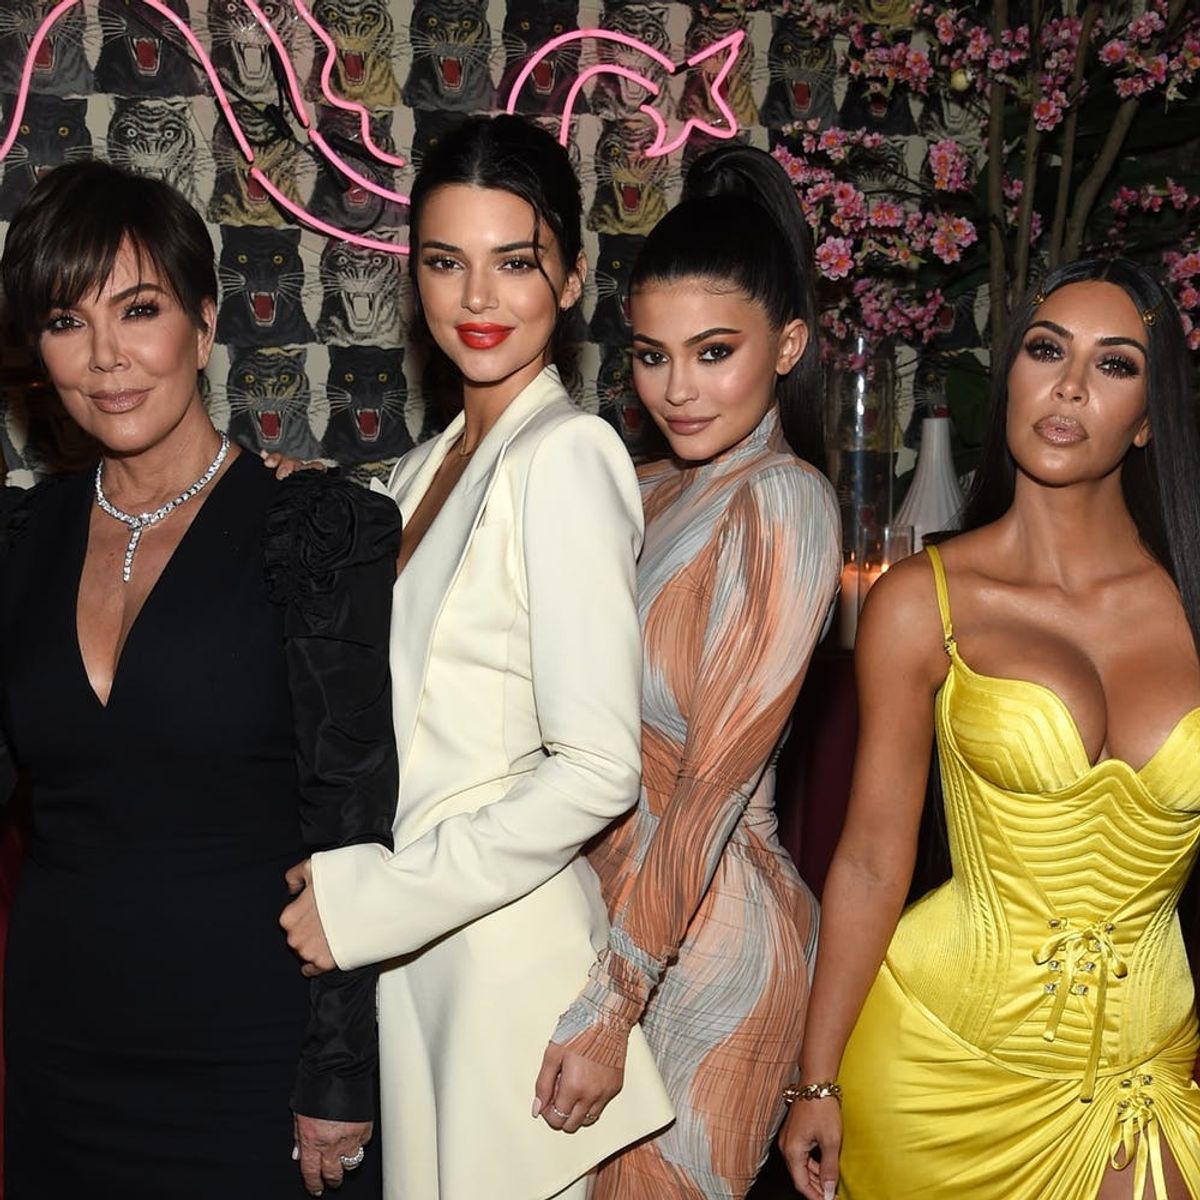 There’s More Than One Meltdown in the ‘KUWTK’ Season 15 Trailer